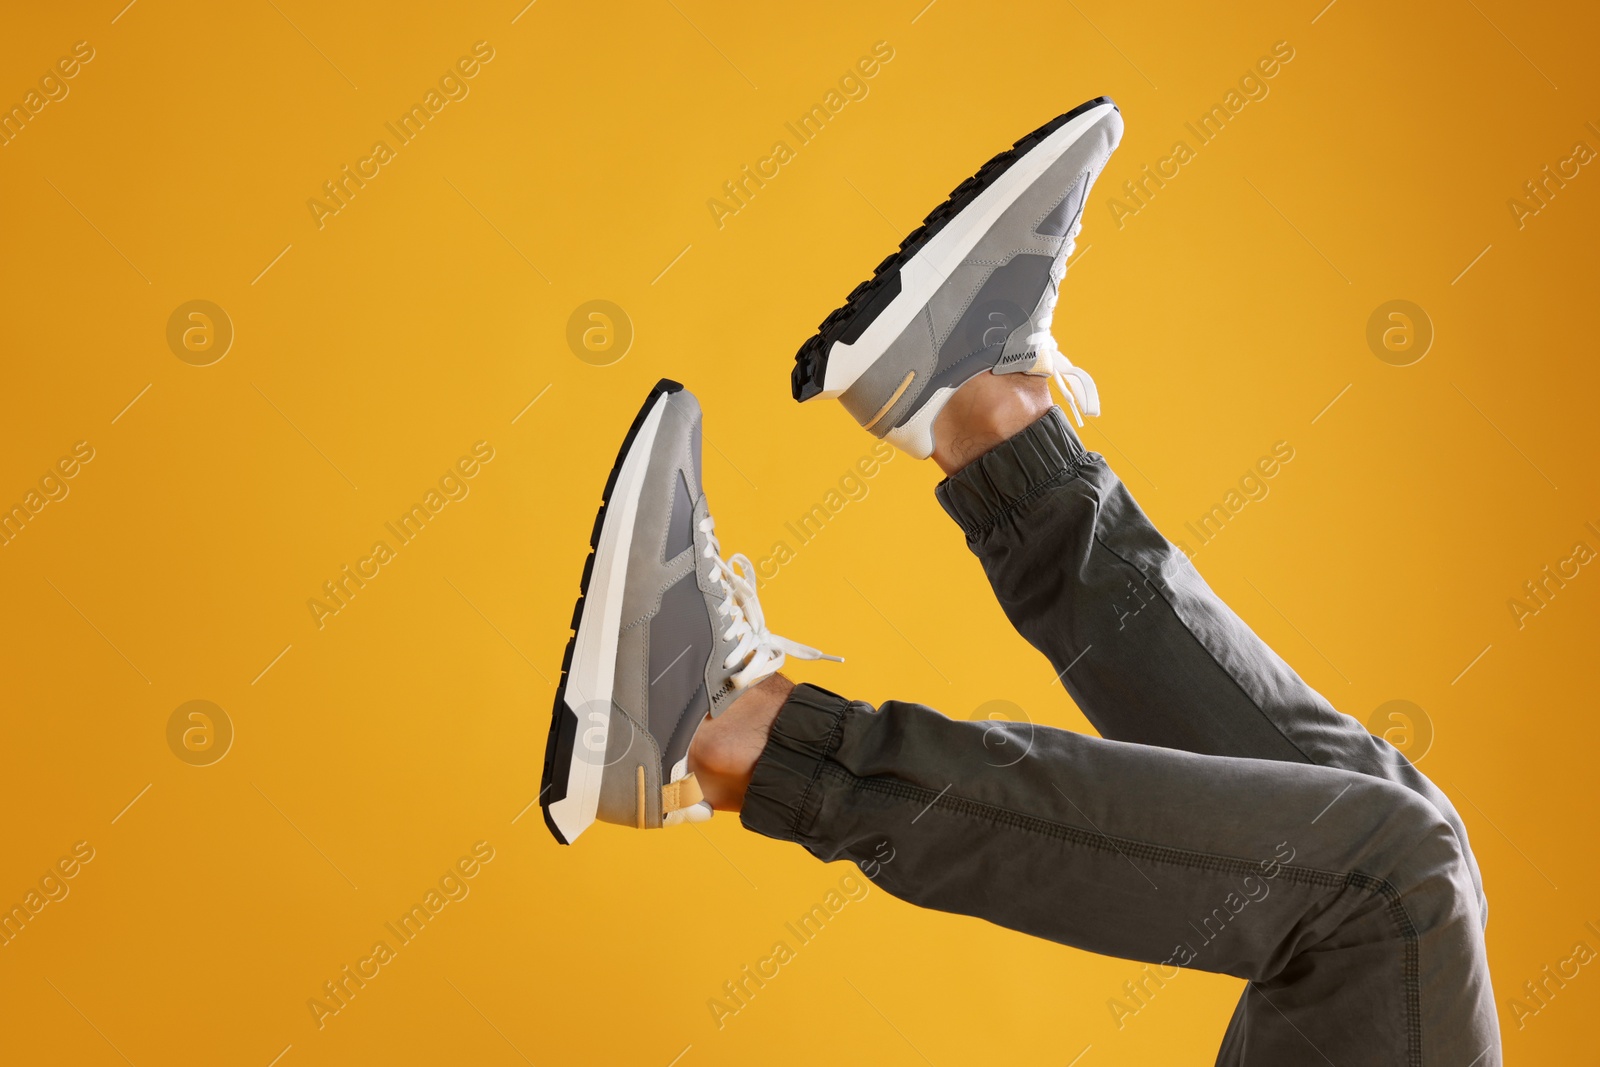 Photo of Man wearing stylish sneakers on yellow background, closeup. Space for text